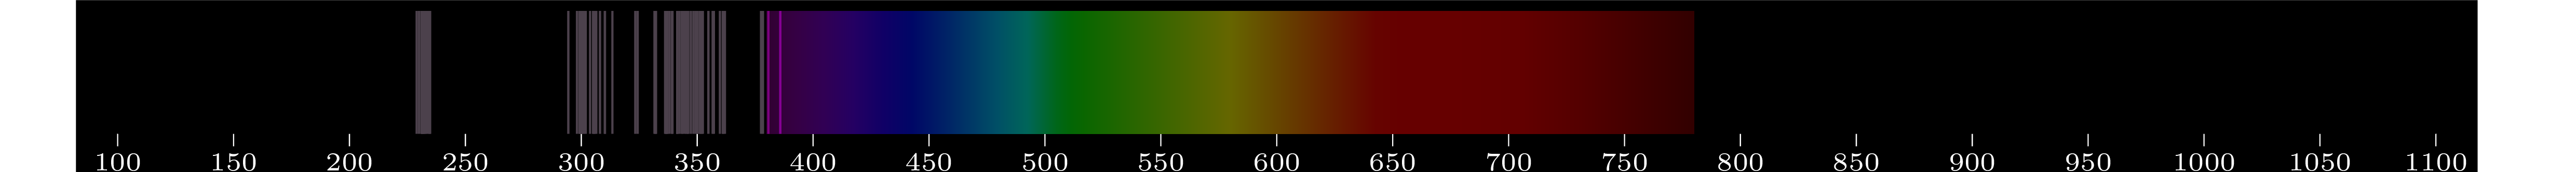 emmision spectra of element Ni